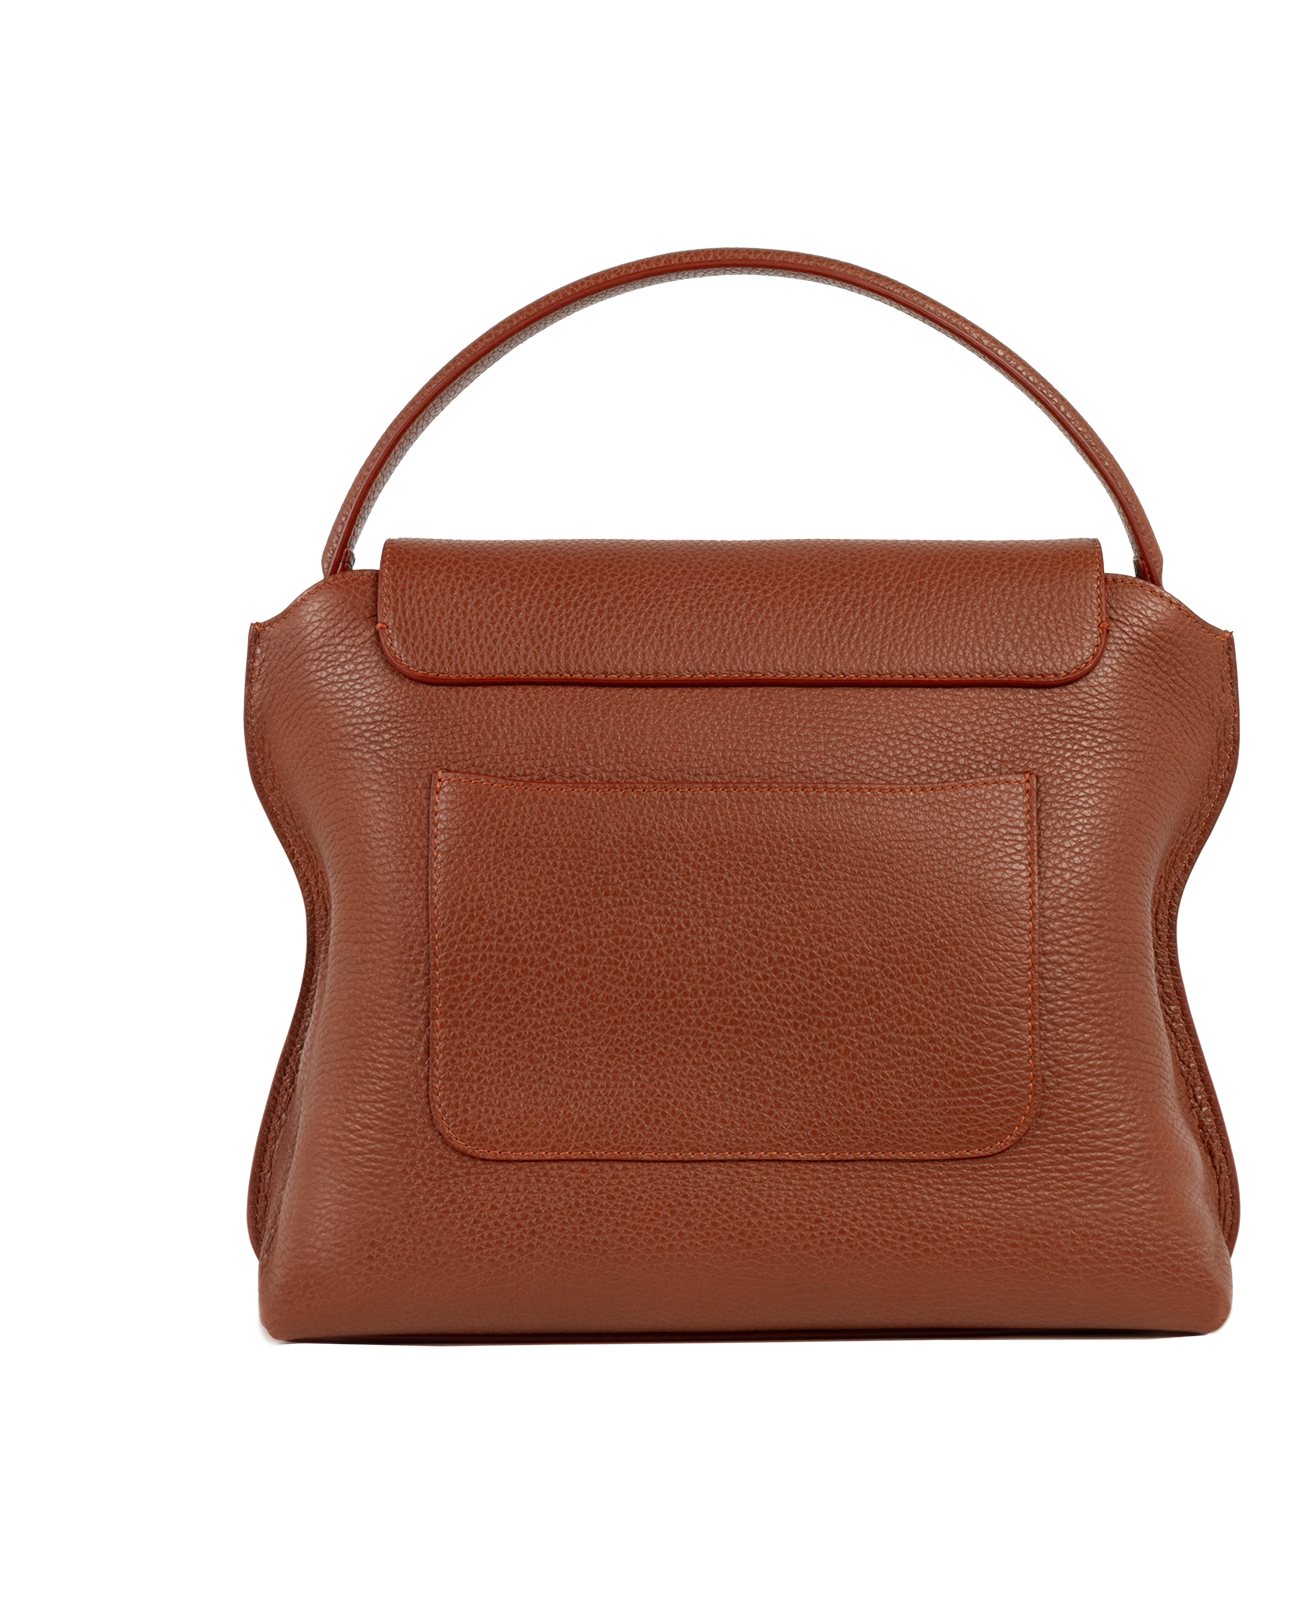 Cross-body bag in Italian full-grain leather, semi-aniline calf Italian leather with detachable shoulder strap.Three compartments, zip pocket in the back compartment. Magnetic flap closure with logo. Color: Brown. Size:Large